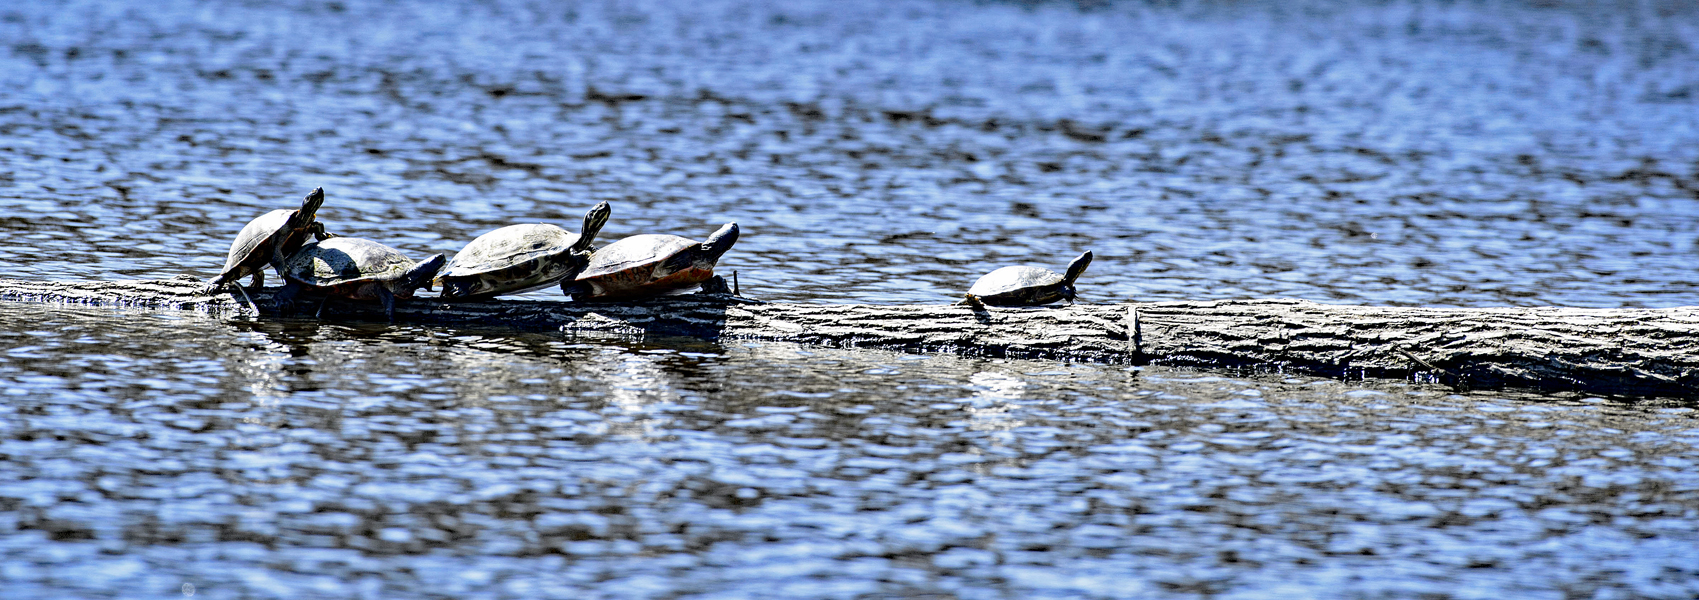 Five turtles in a row rest on a log